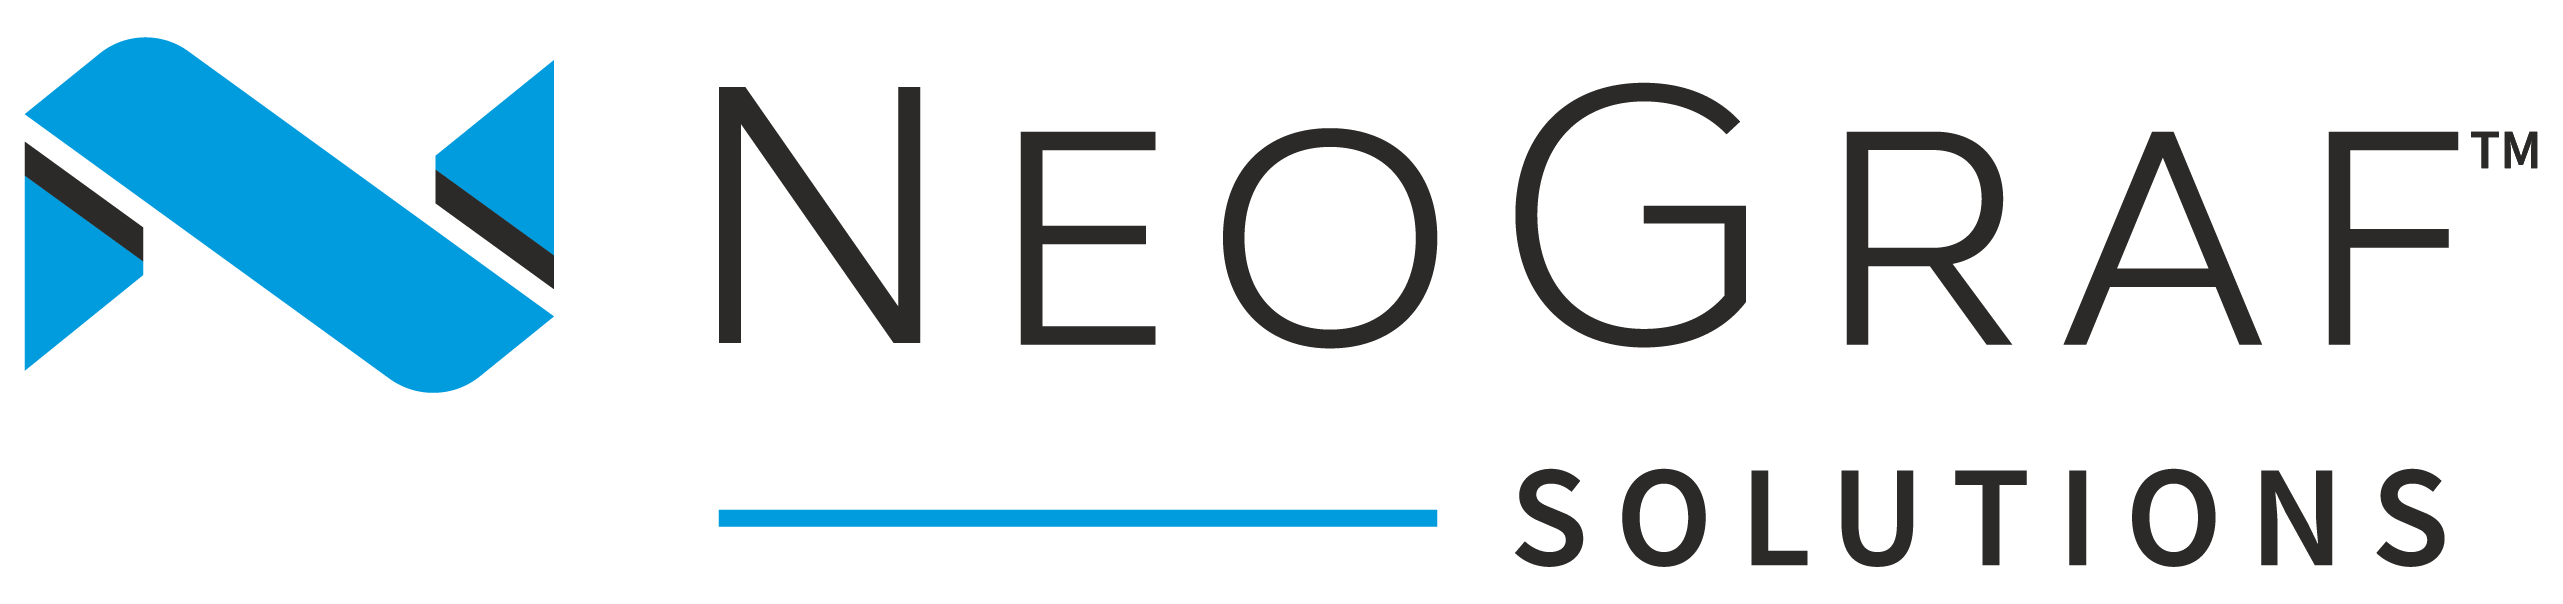 NEOGRAF SOLUTIONS